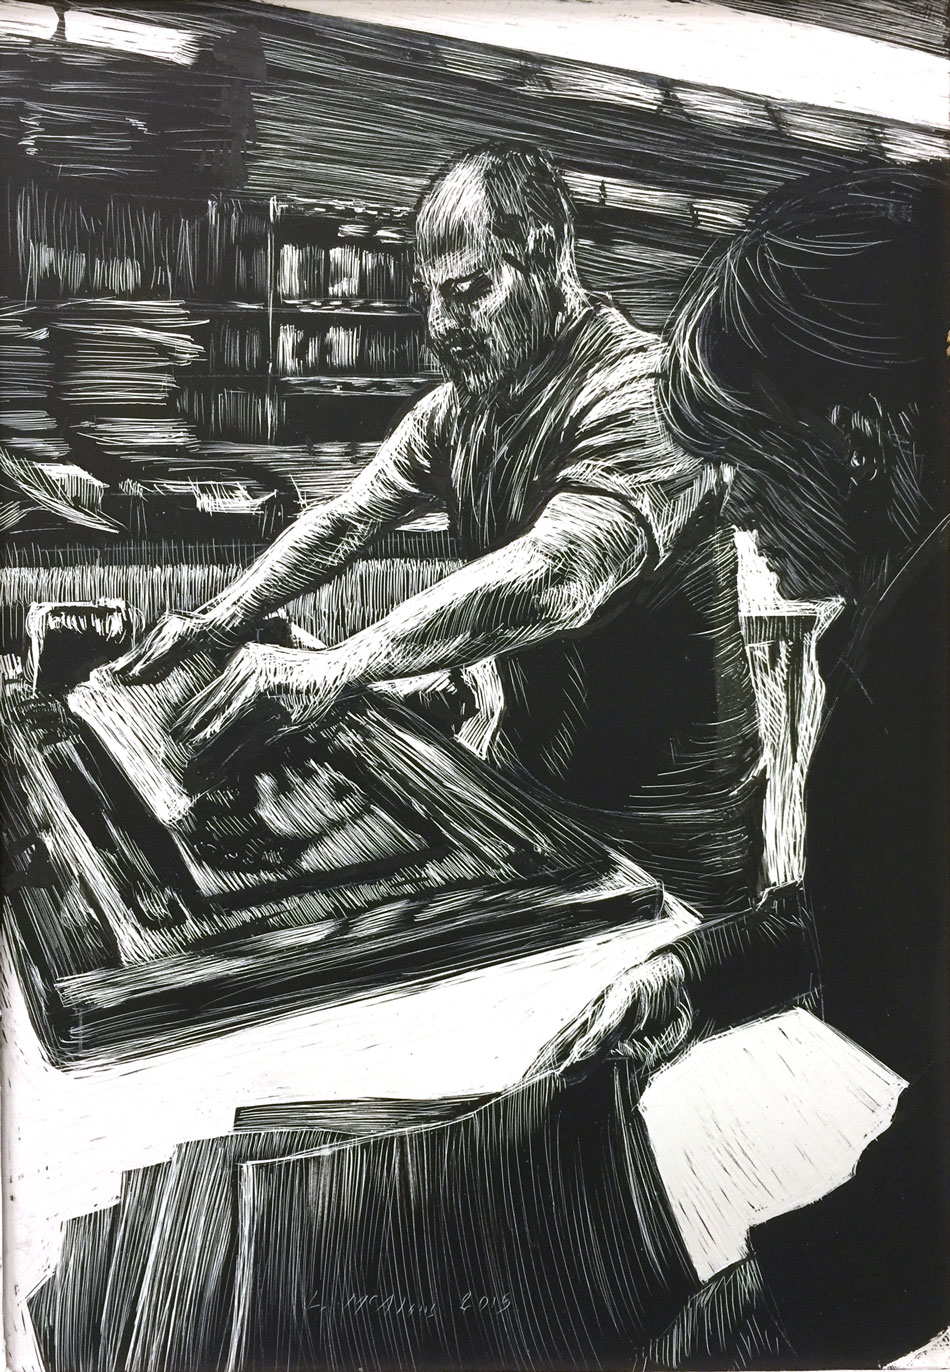 man and woman pulling screen prints scratchboard drawing named "art tradition"